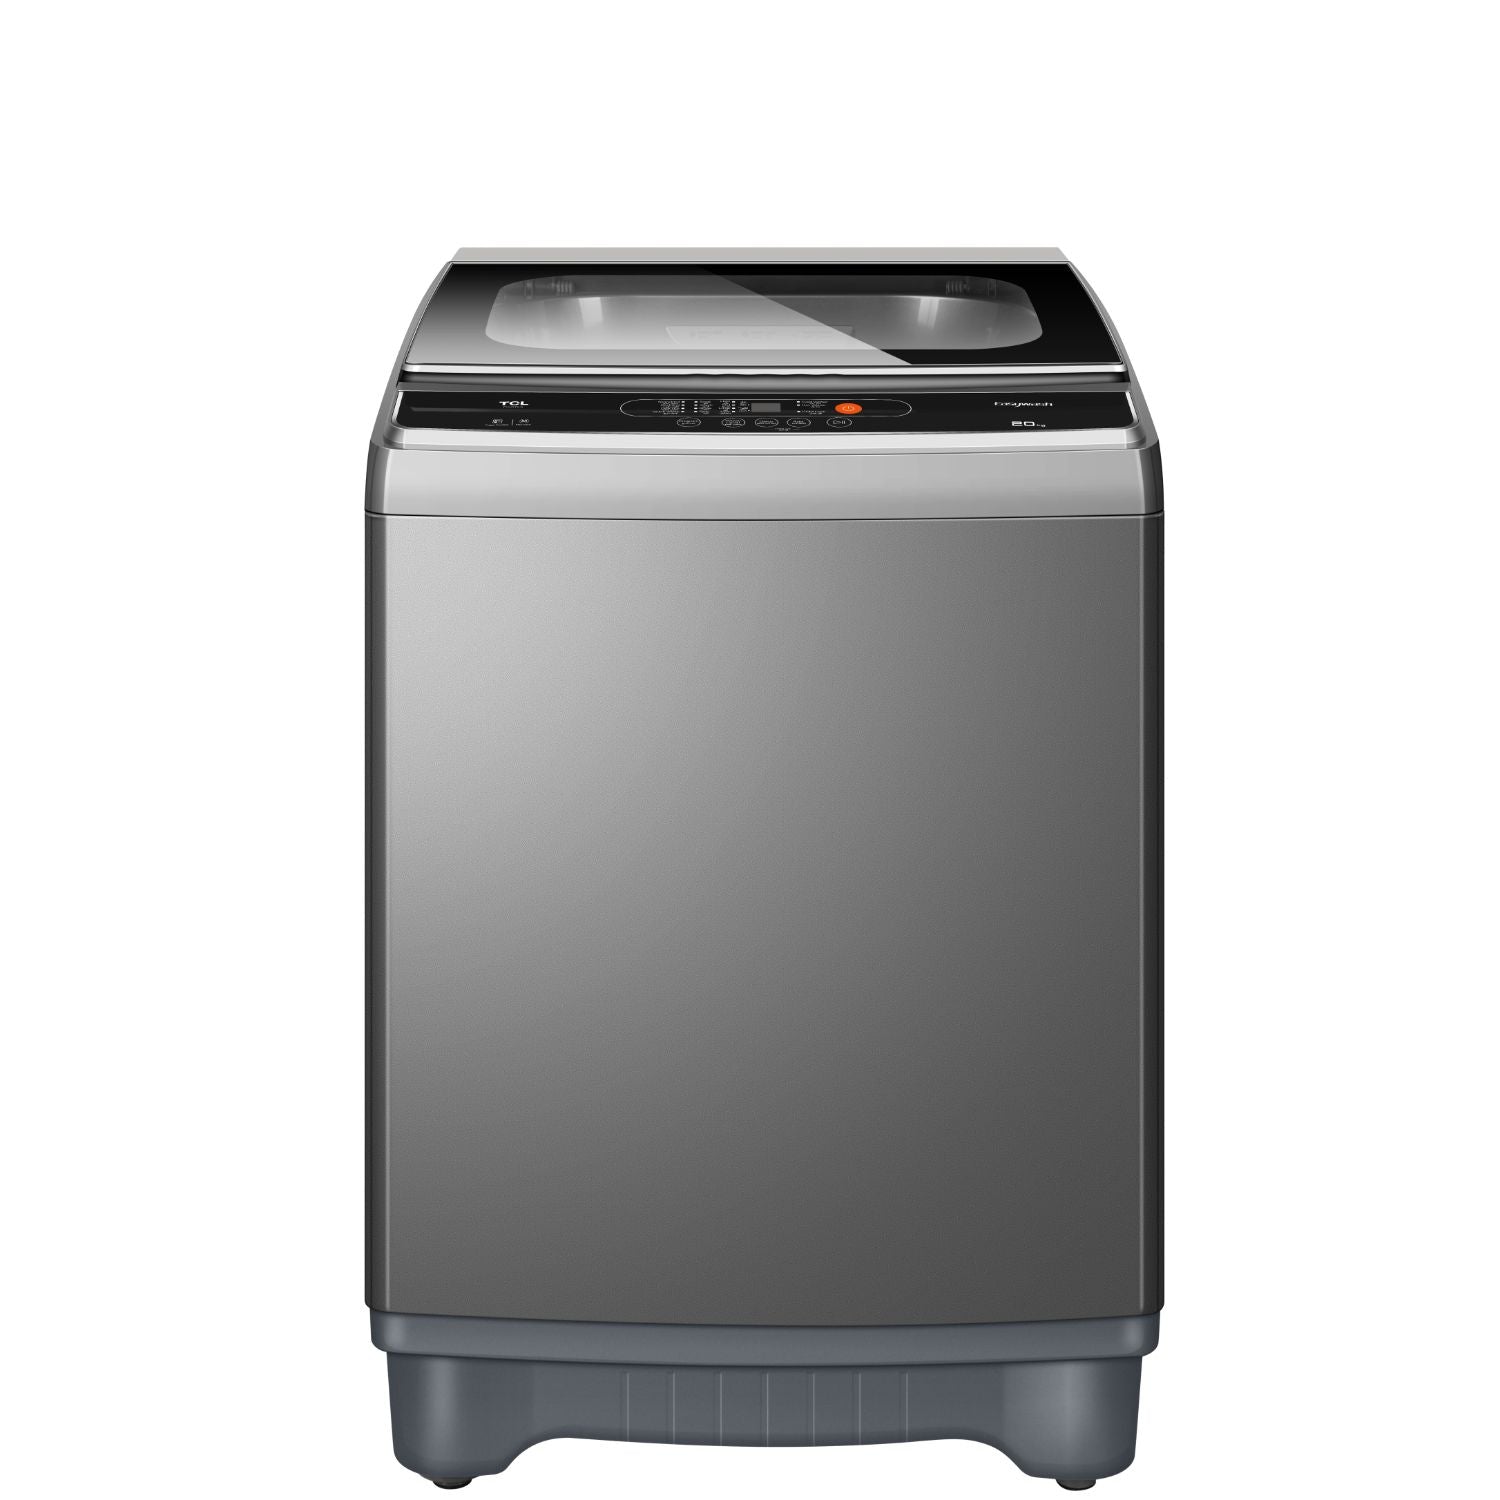 TCL 20KG TL WASHING MACHINE WITH PUMP - SILVER